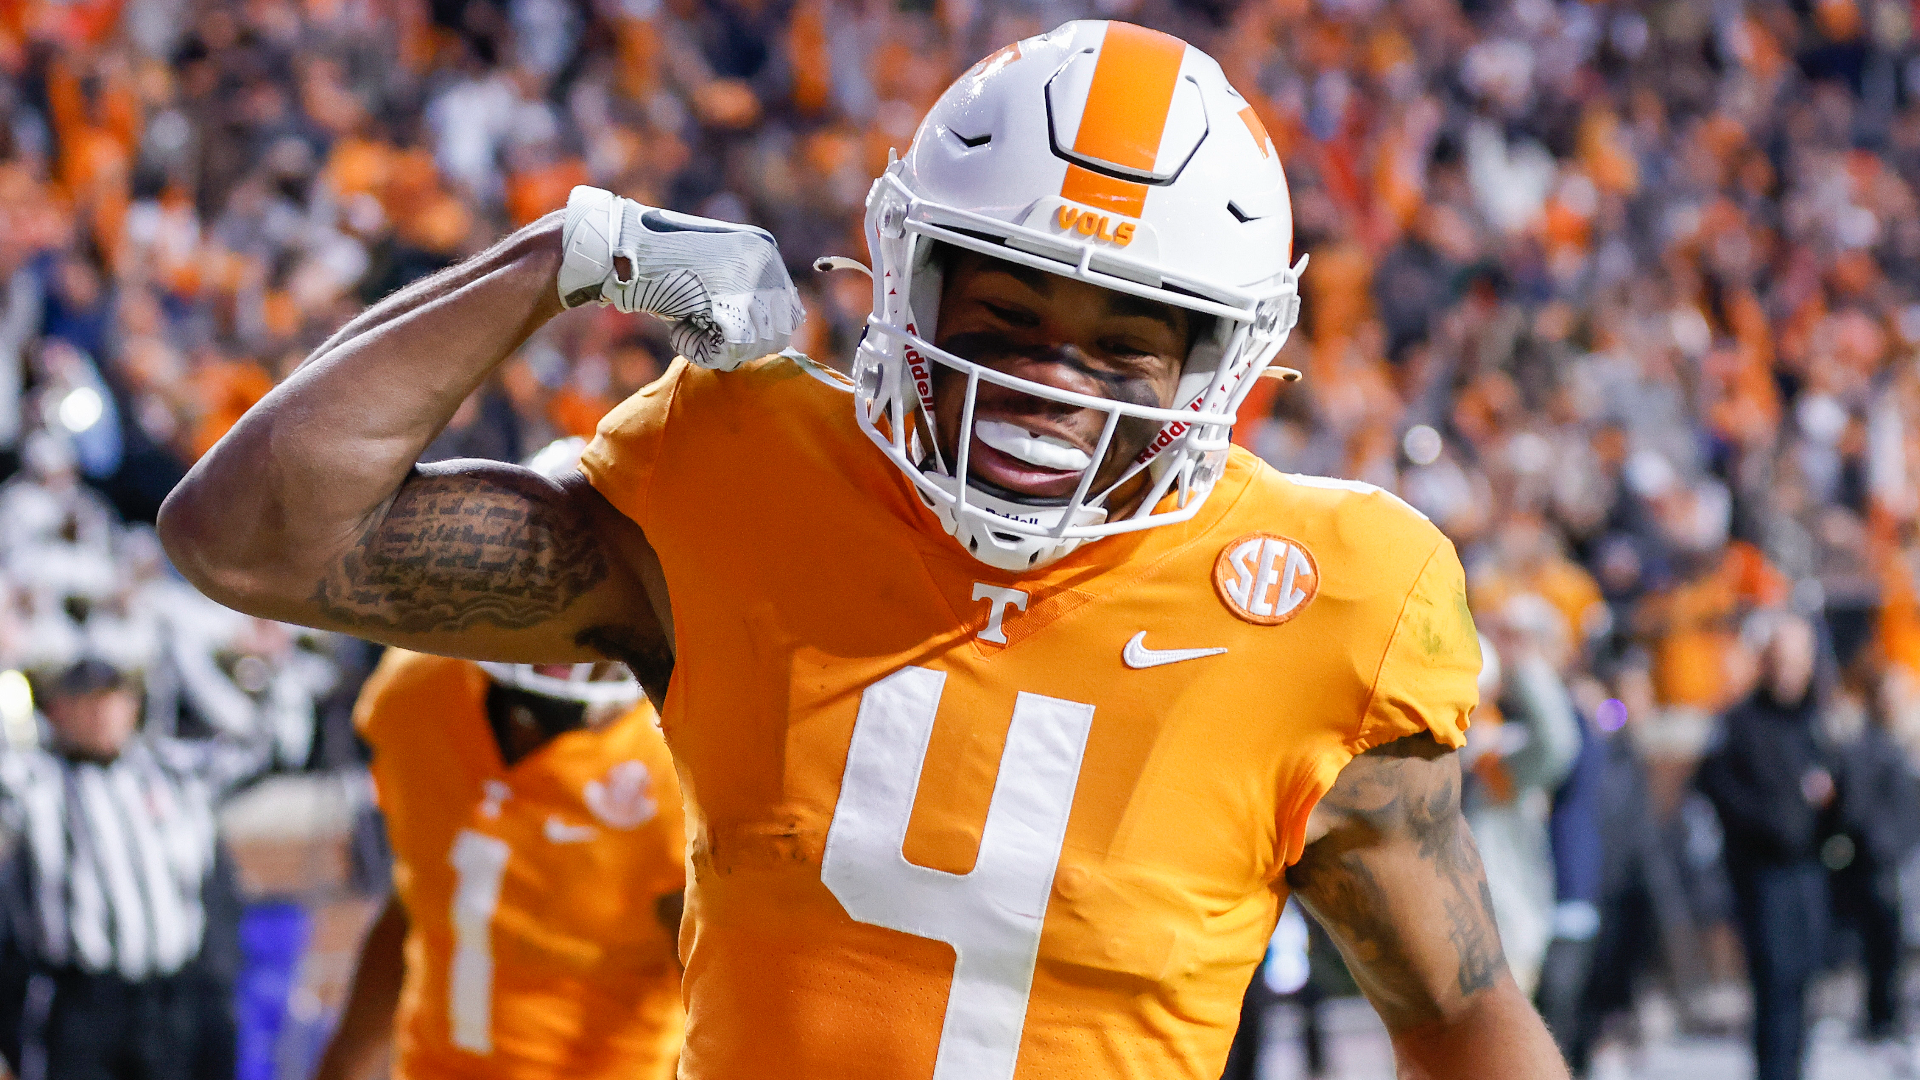 Five of Tennessee's last seven bowl appearances have been against Big Ten opponents. They have won all five dating back to 2008.